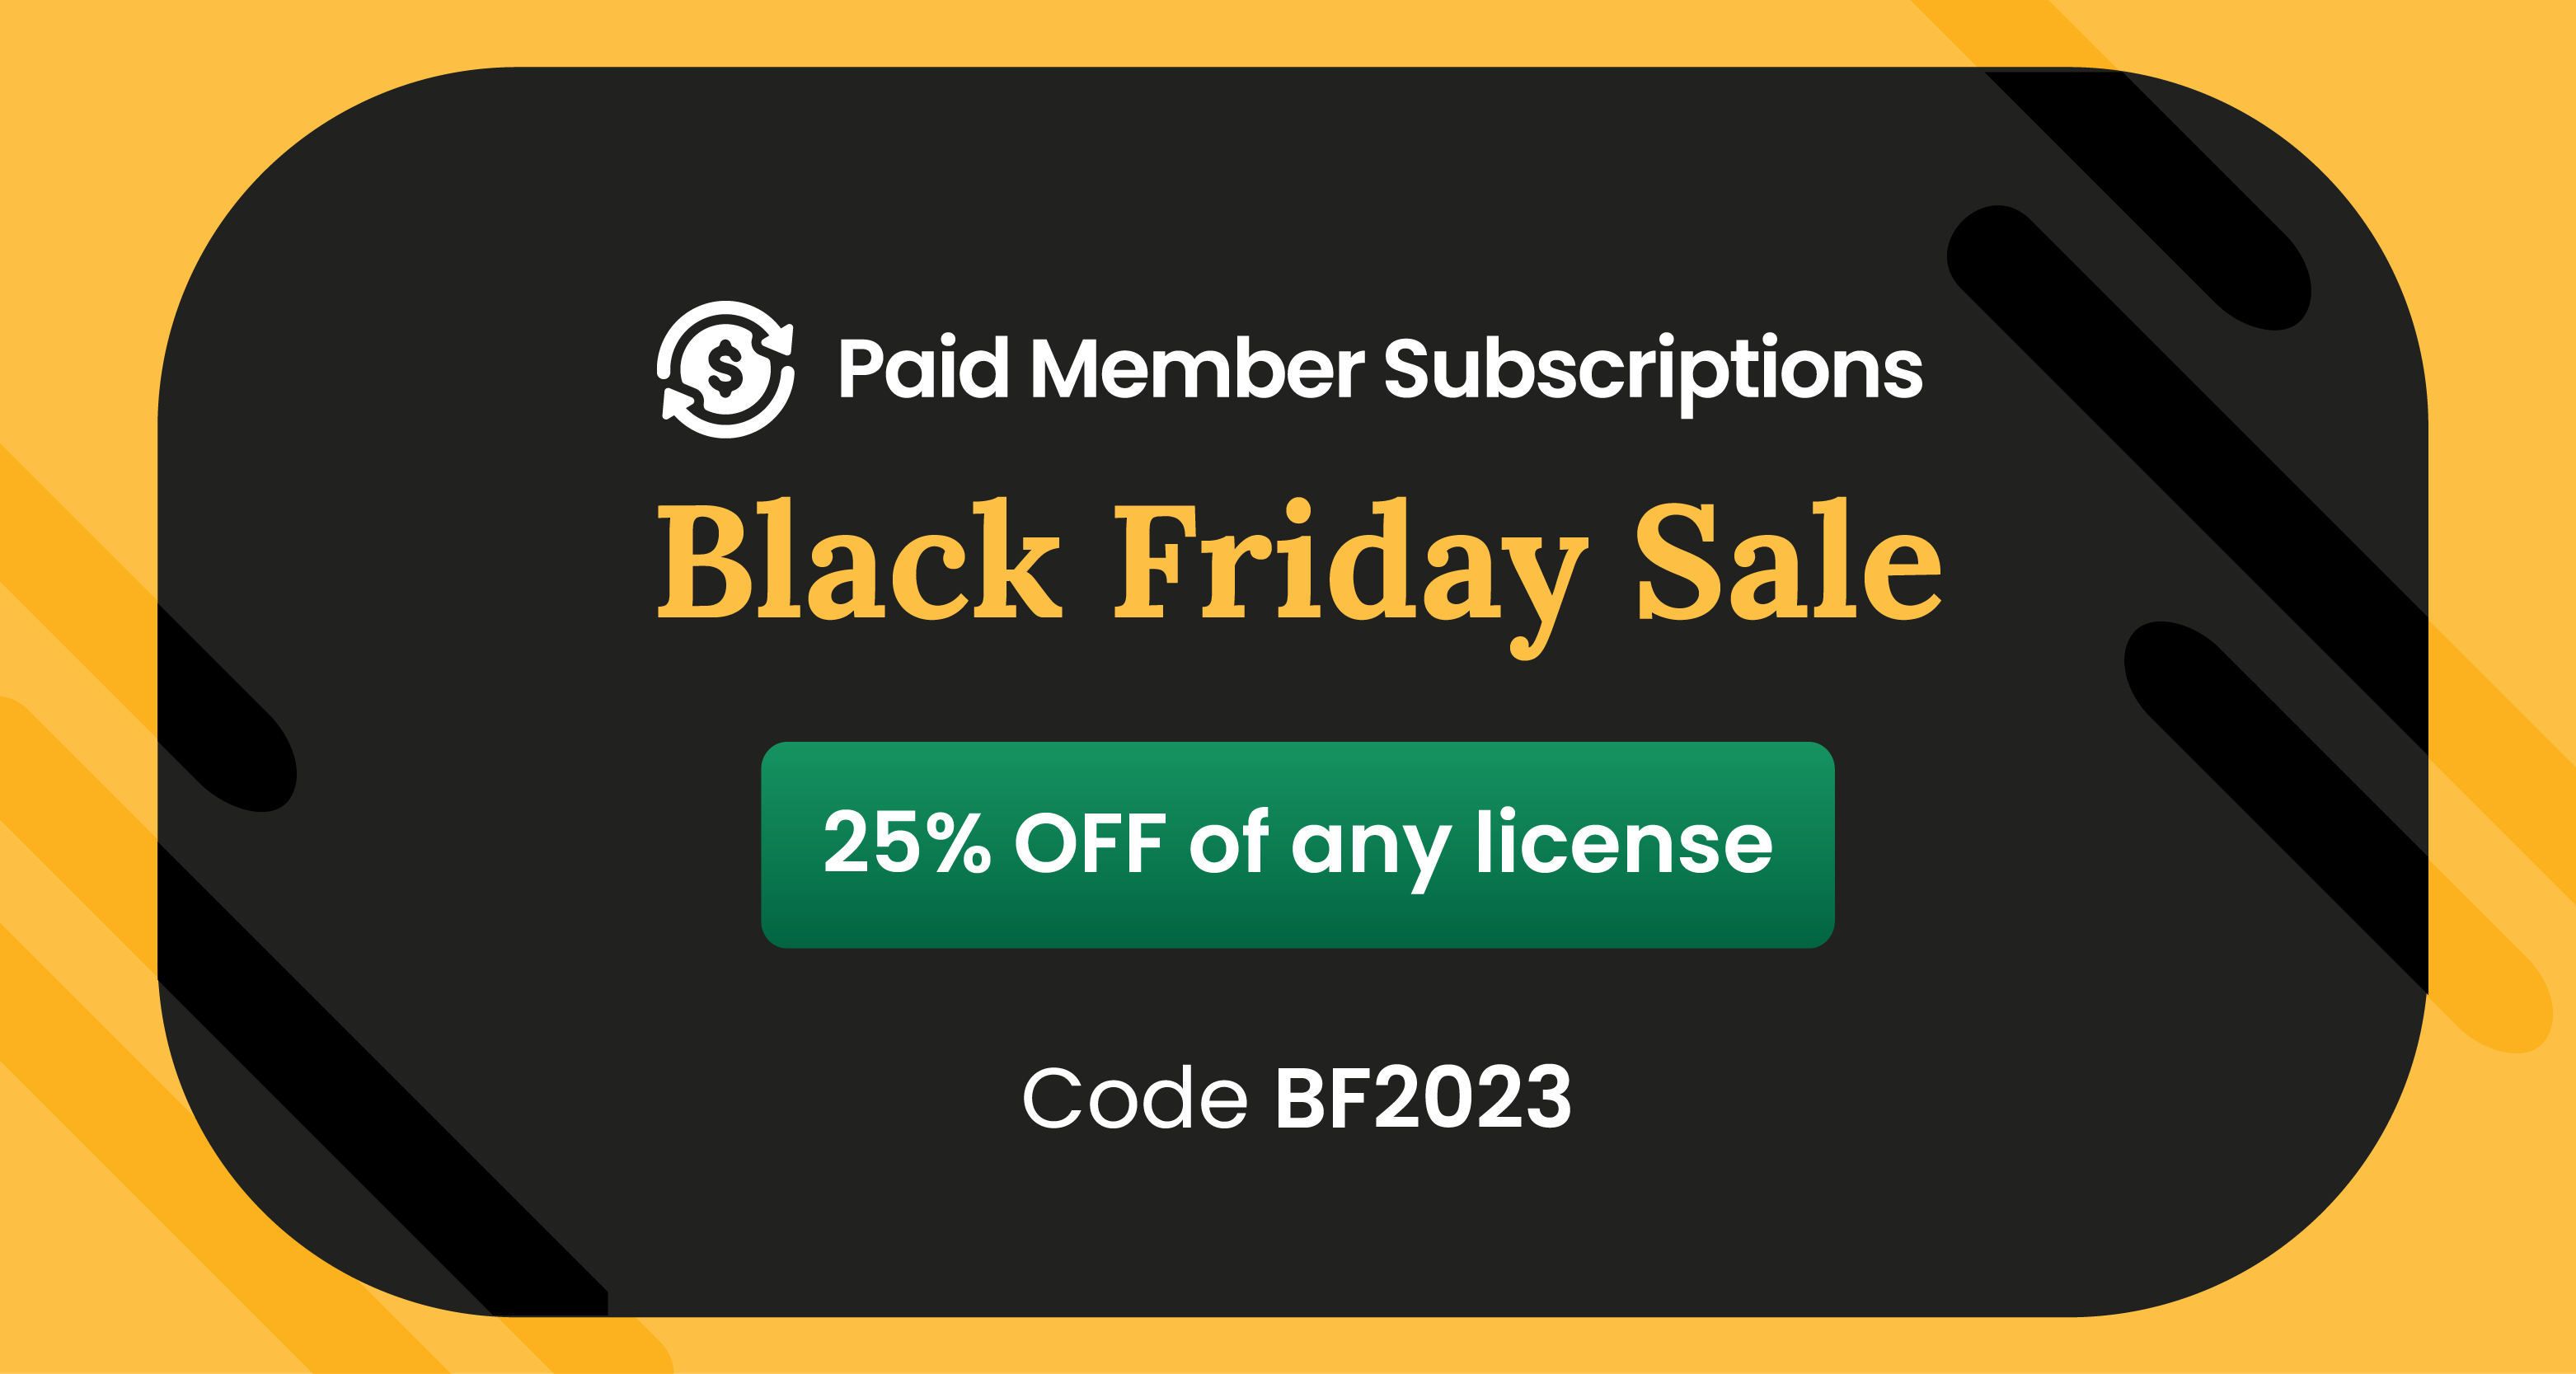 Paid Member Subscriptions Black Friday Deal